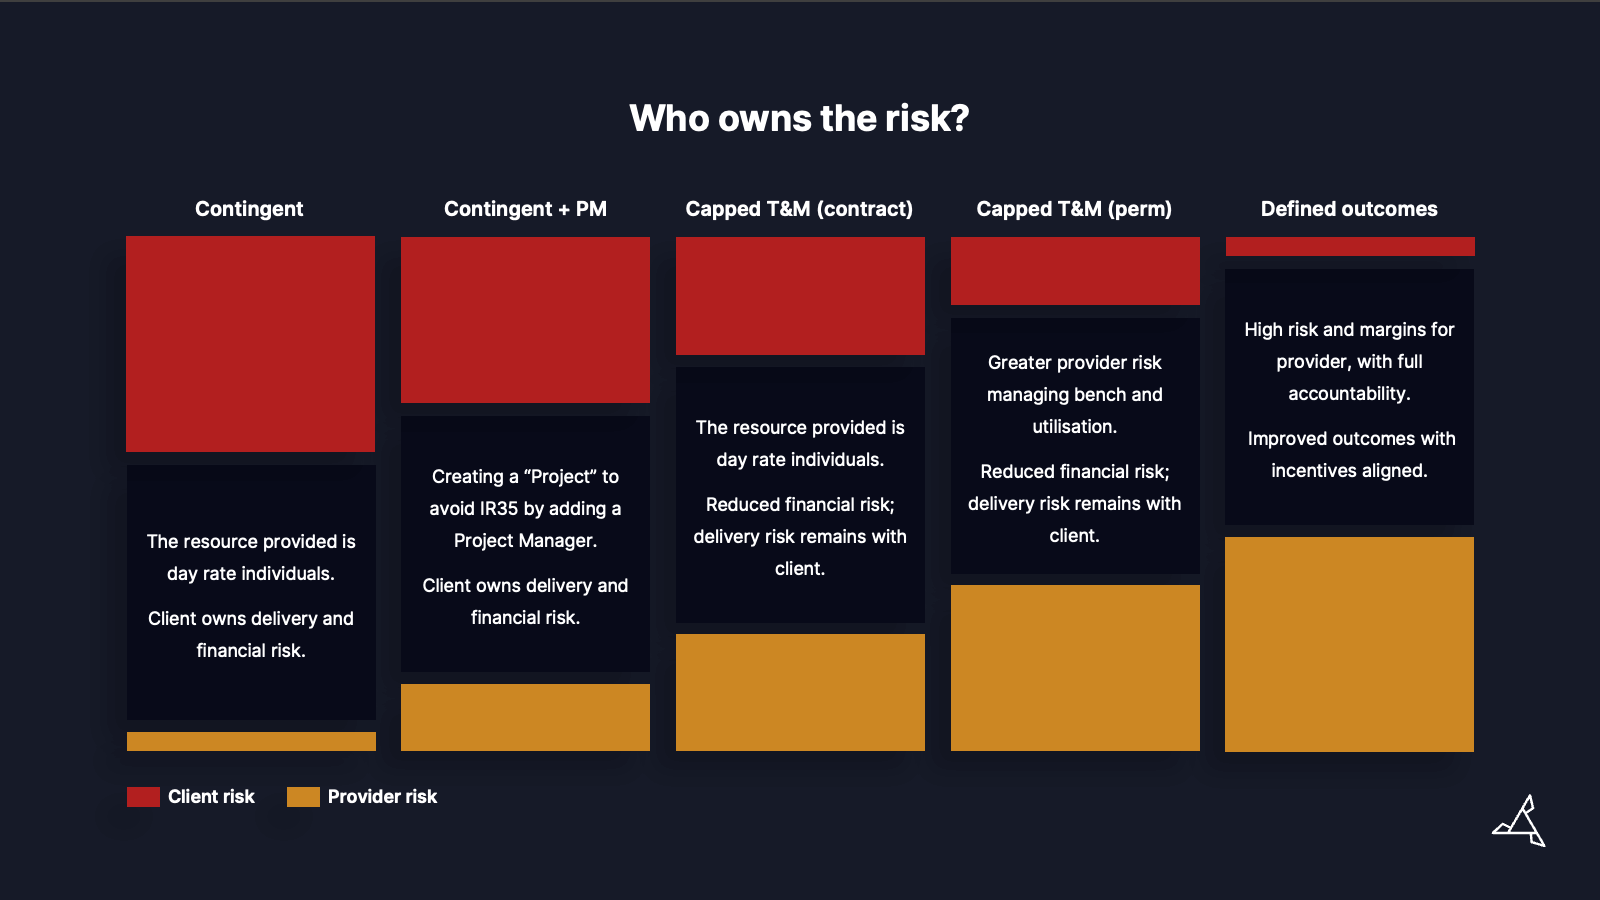 Who owns the risk?